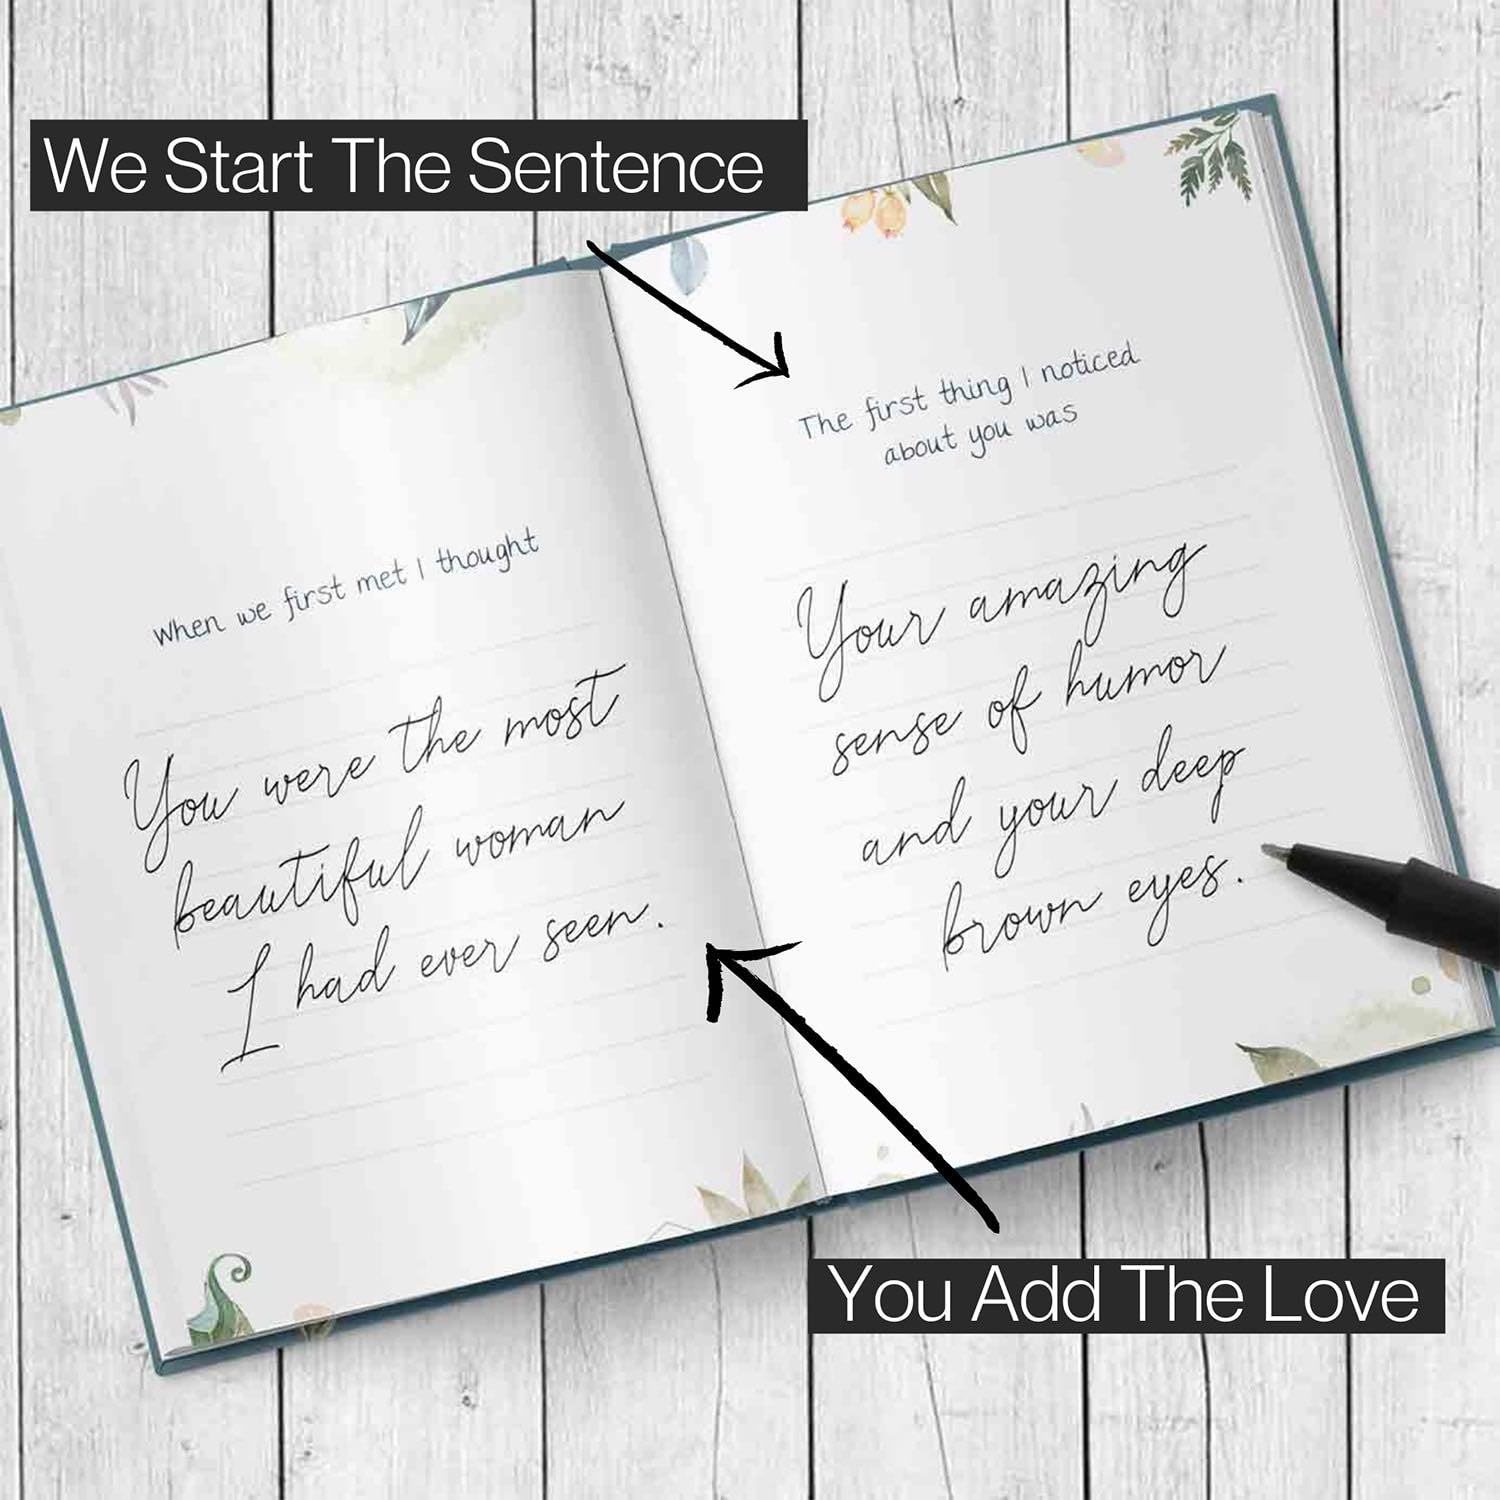 Why I love you book interior example. Custom gift for couple. Fill In the blank book.